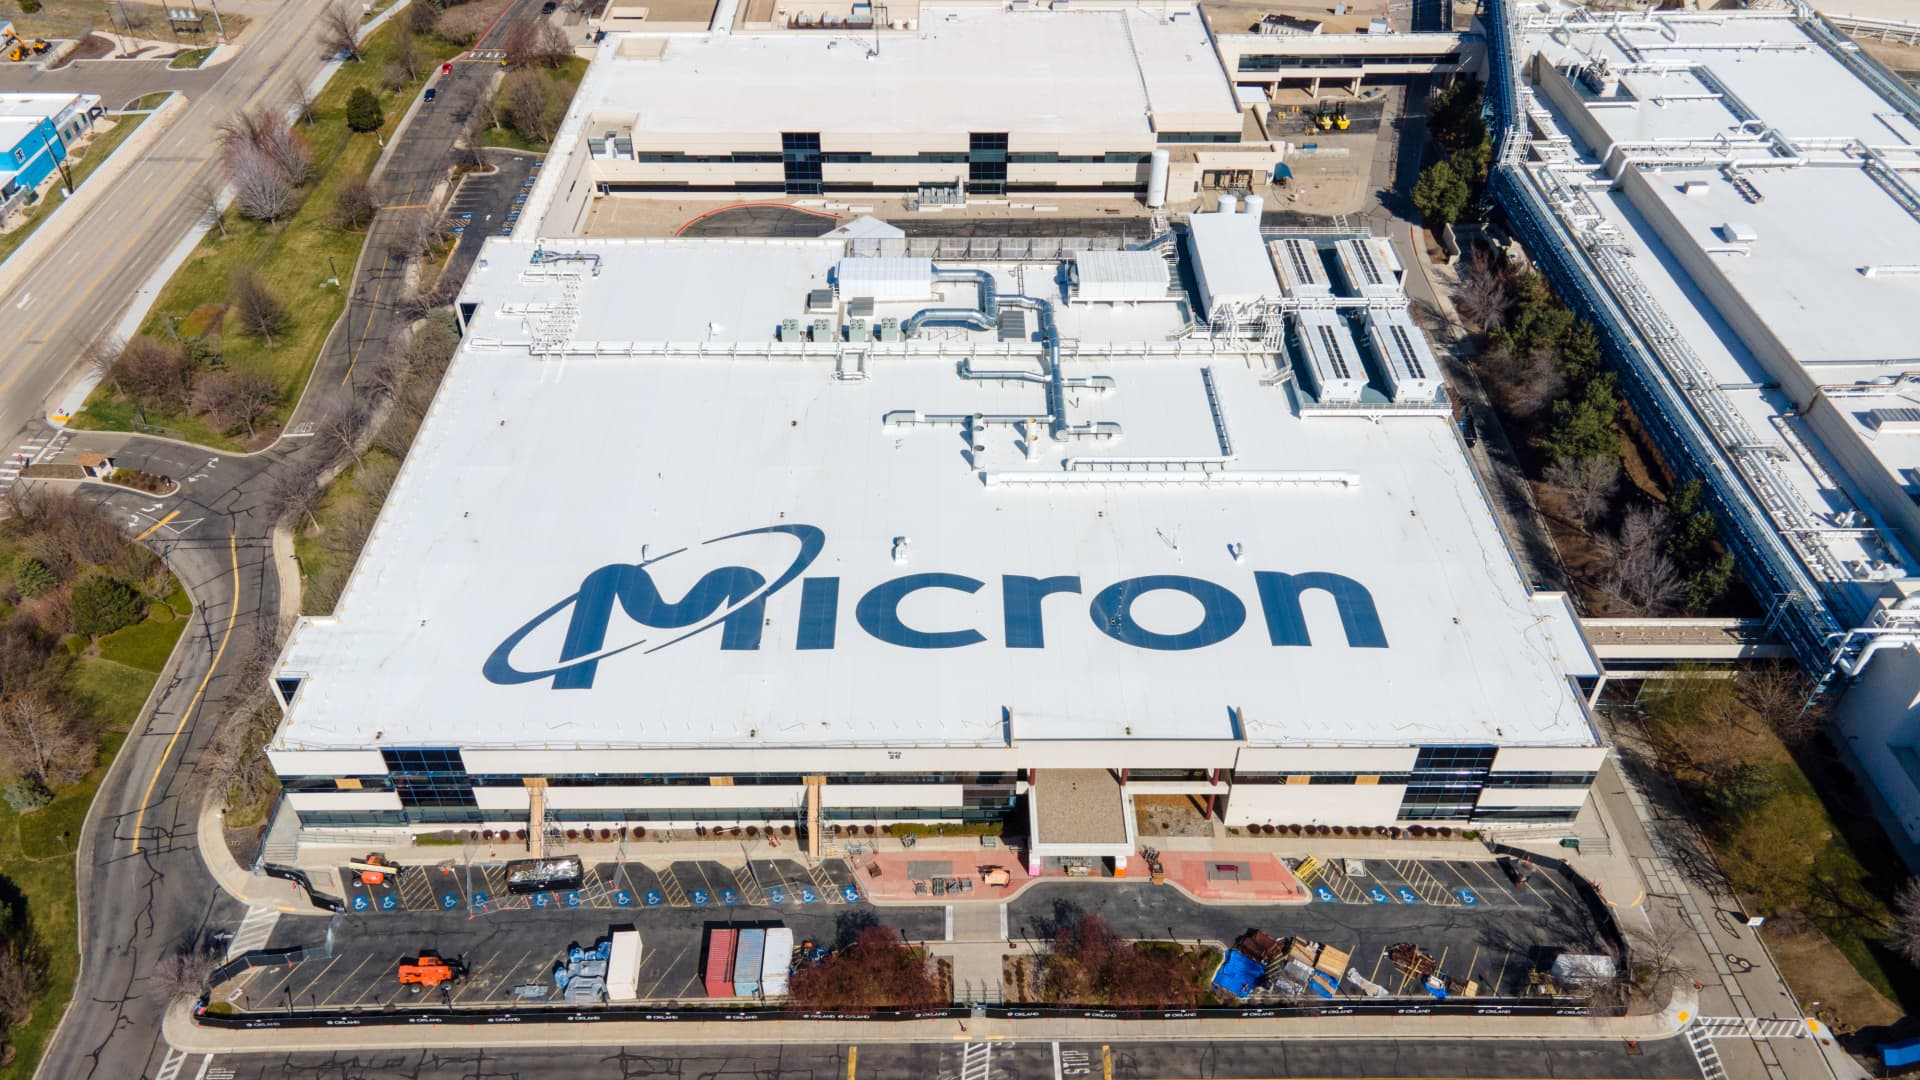 Shares of Micron pop 14% on earnings beat driven by AI boom